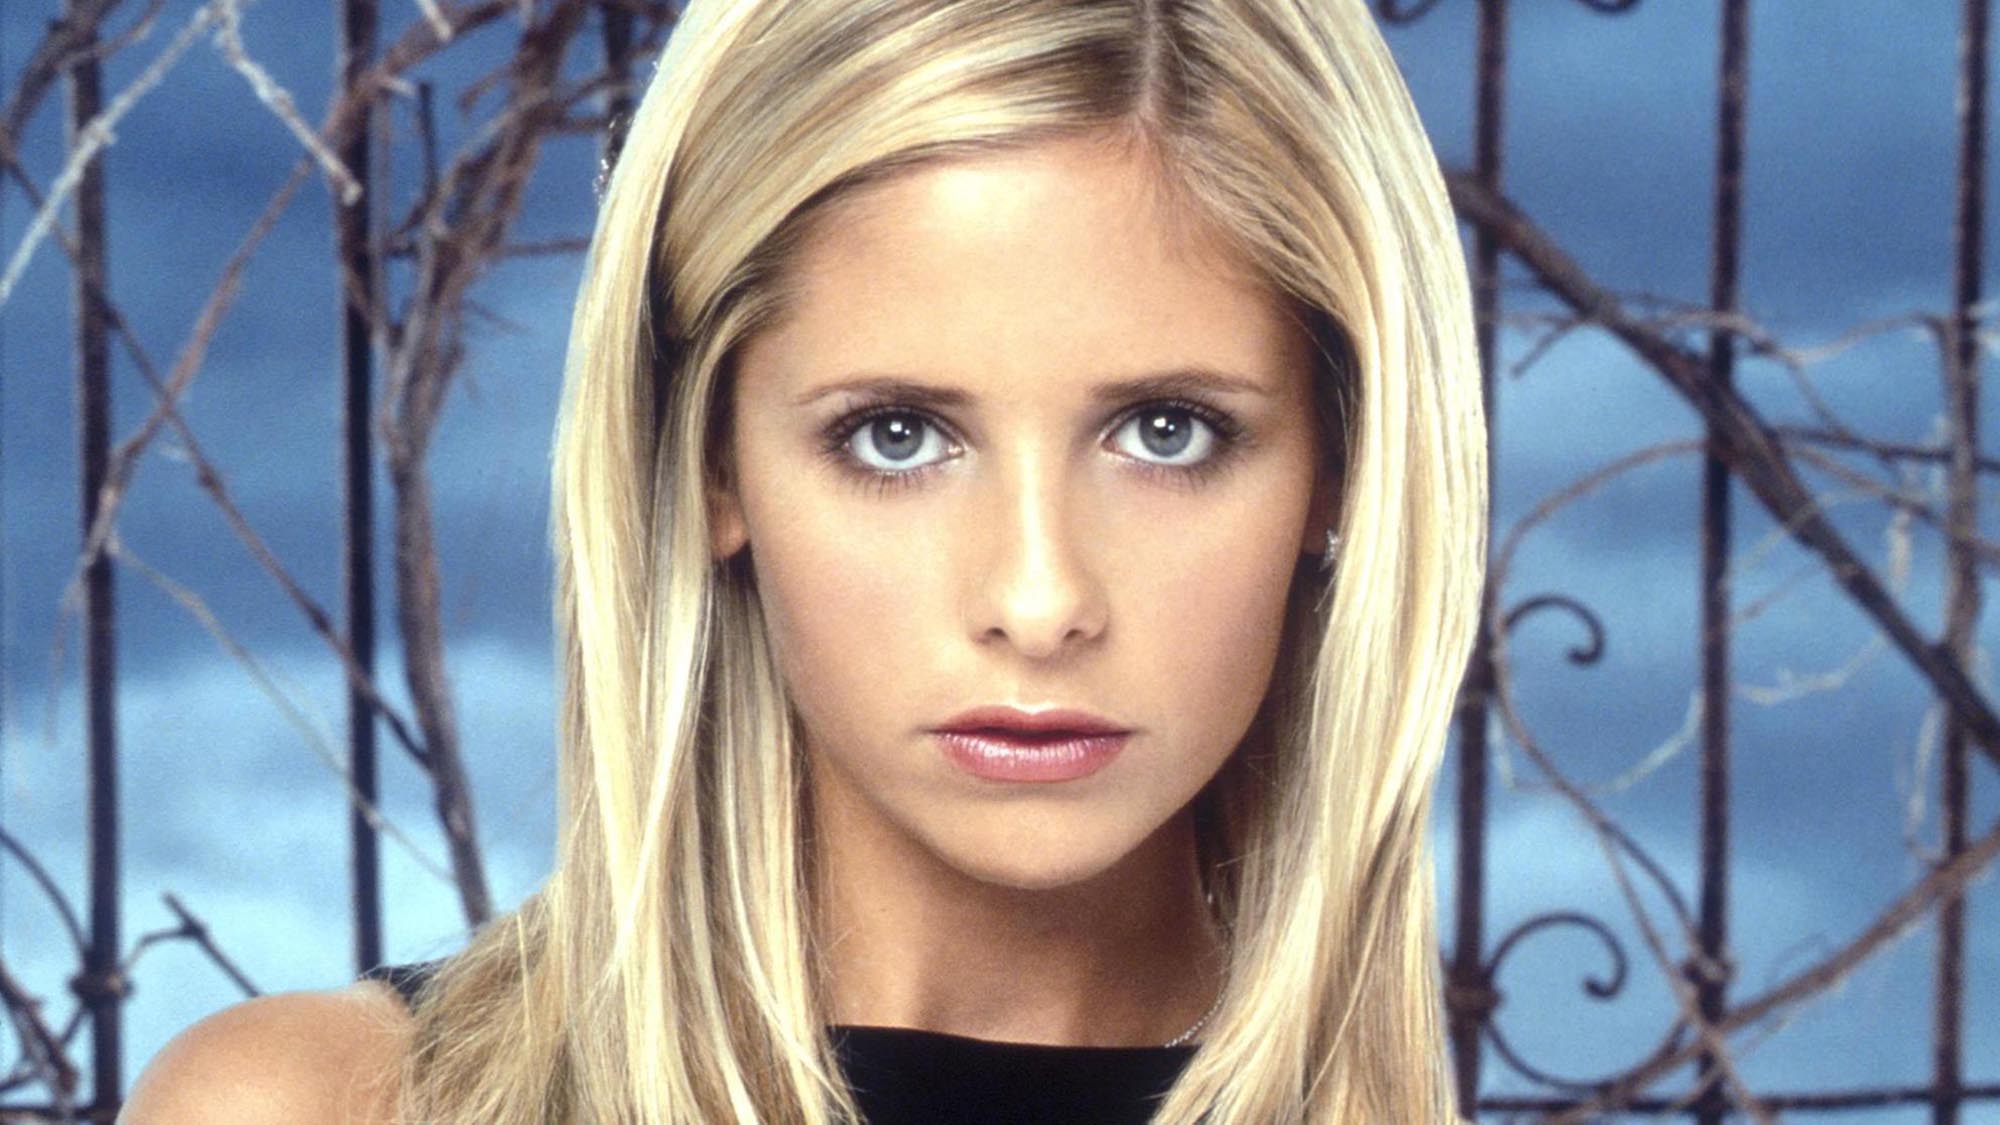 In celebration of the show turning 21 this month (feel old yet?) and the fact 'Buffy the Vampire Slayer' will always hold a special place in our hearts, here are some of her most kickass moments.